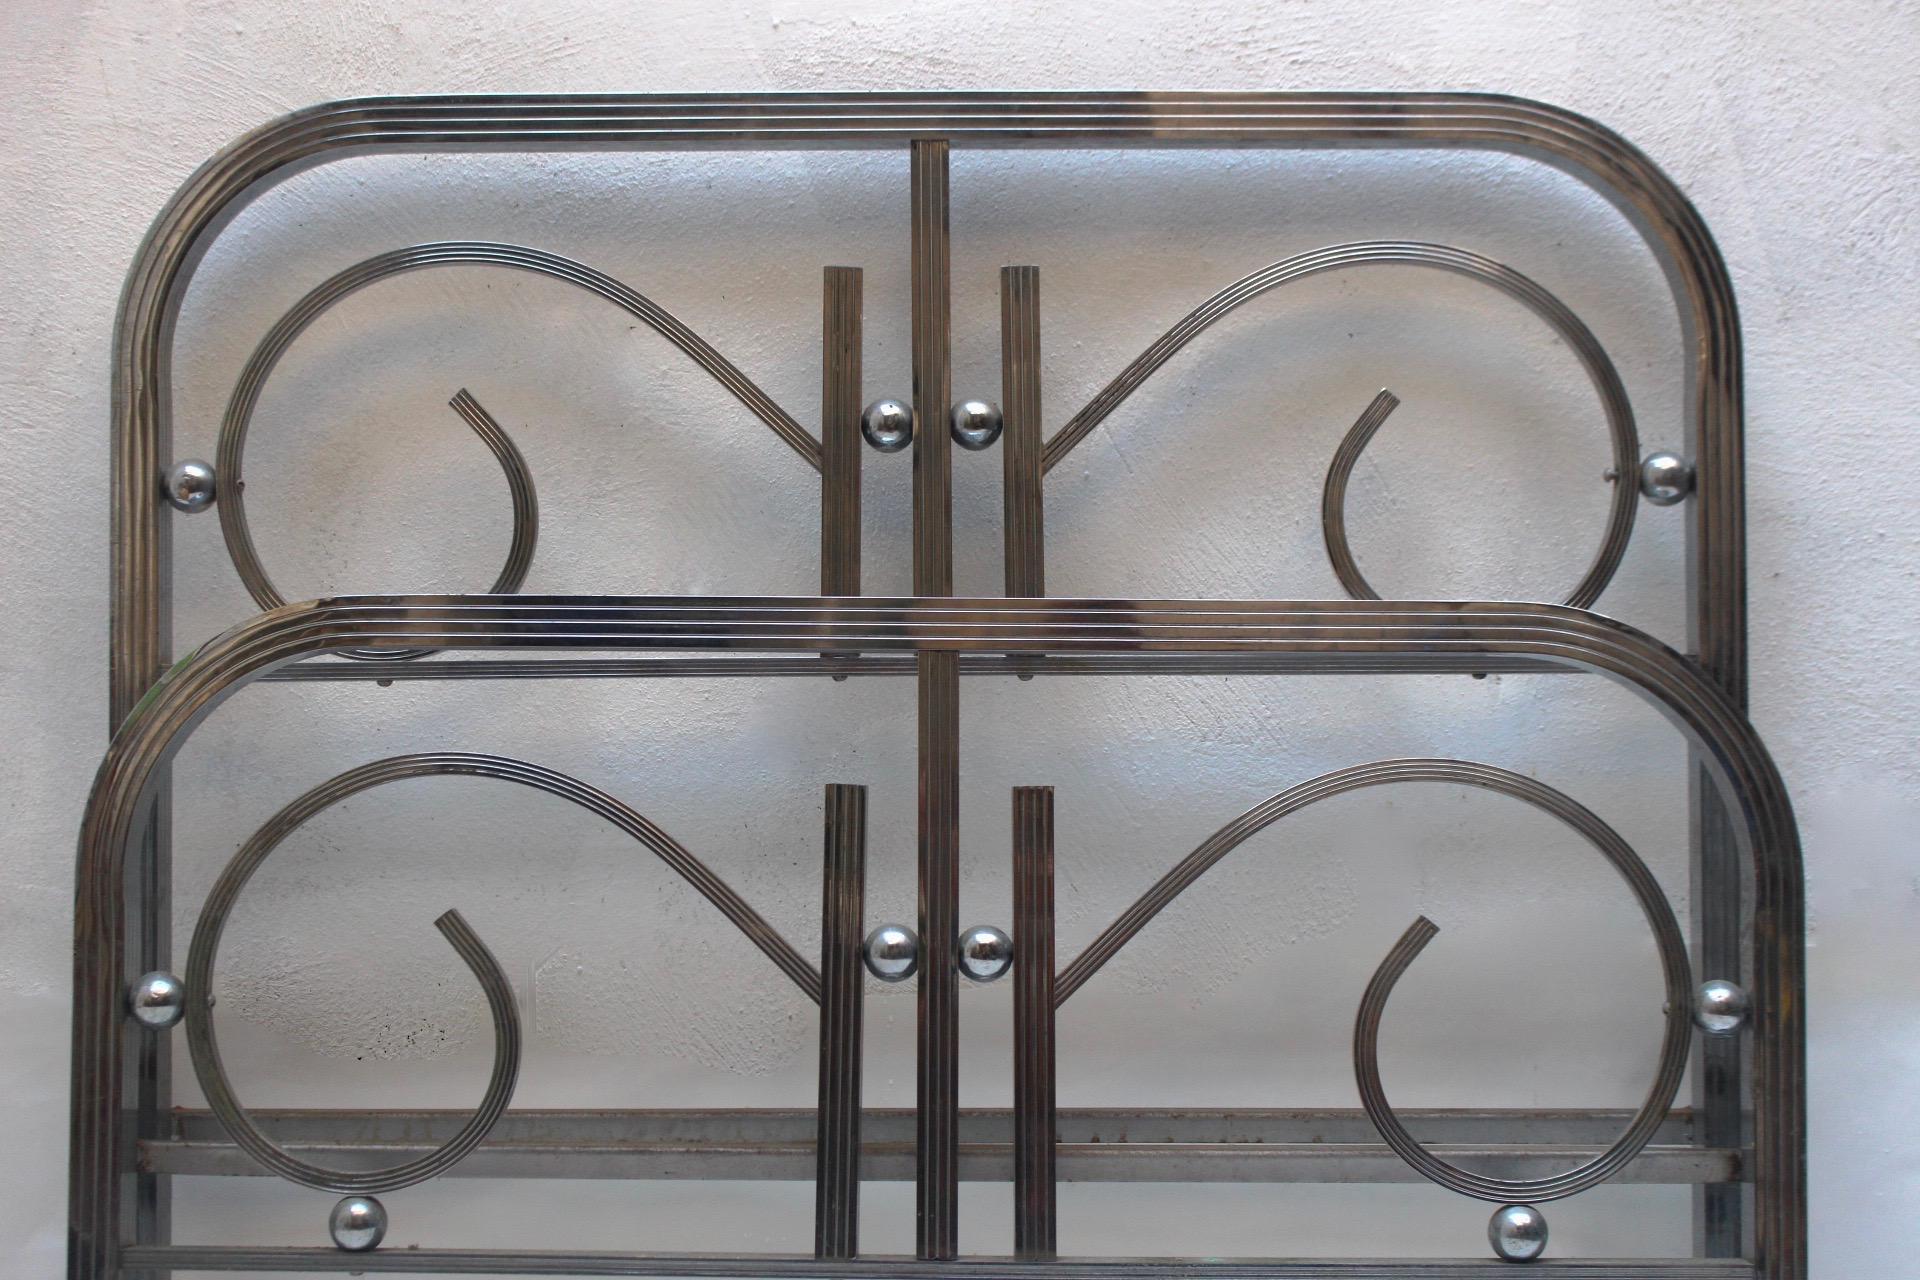 Art Deco nickeled brass bed, headboard and foot part, Spain, circa 1930s.
Fair condition. Note that both mattress support bars featuring oxide wear can be removed if need it.
Nickeled brass structures featuring visible wear, but without oxide